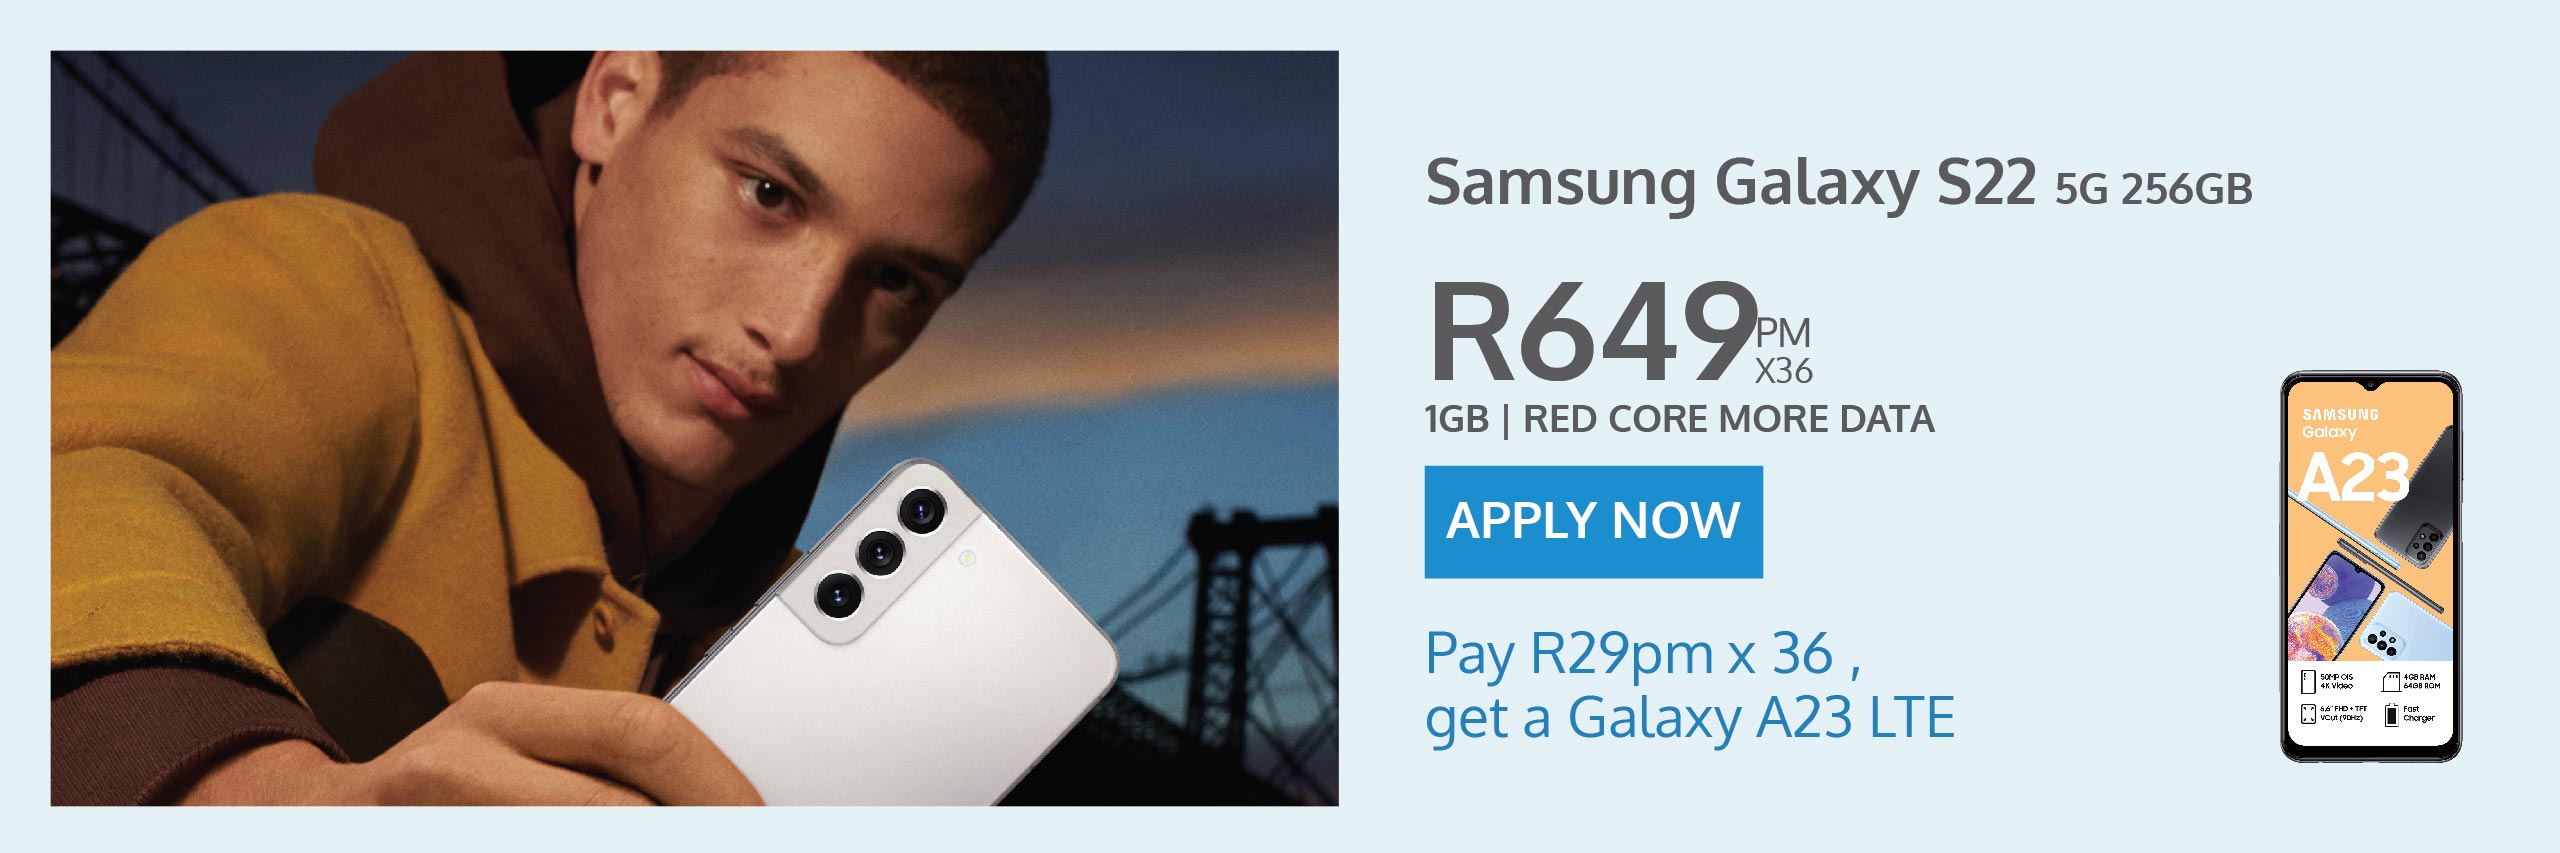 Samsung galaxy S22 5G. contract deal